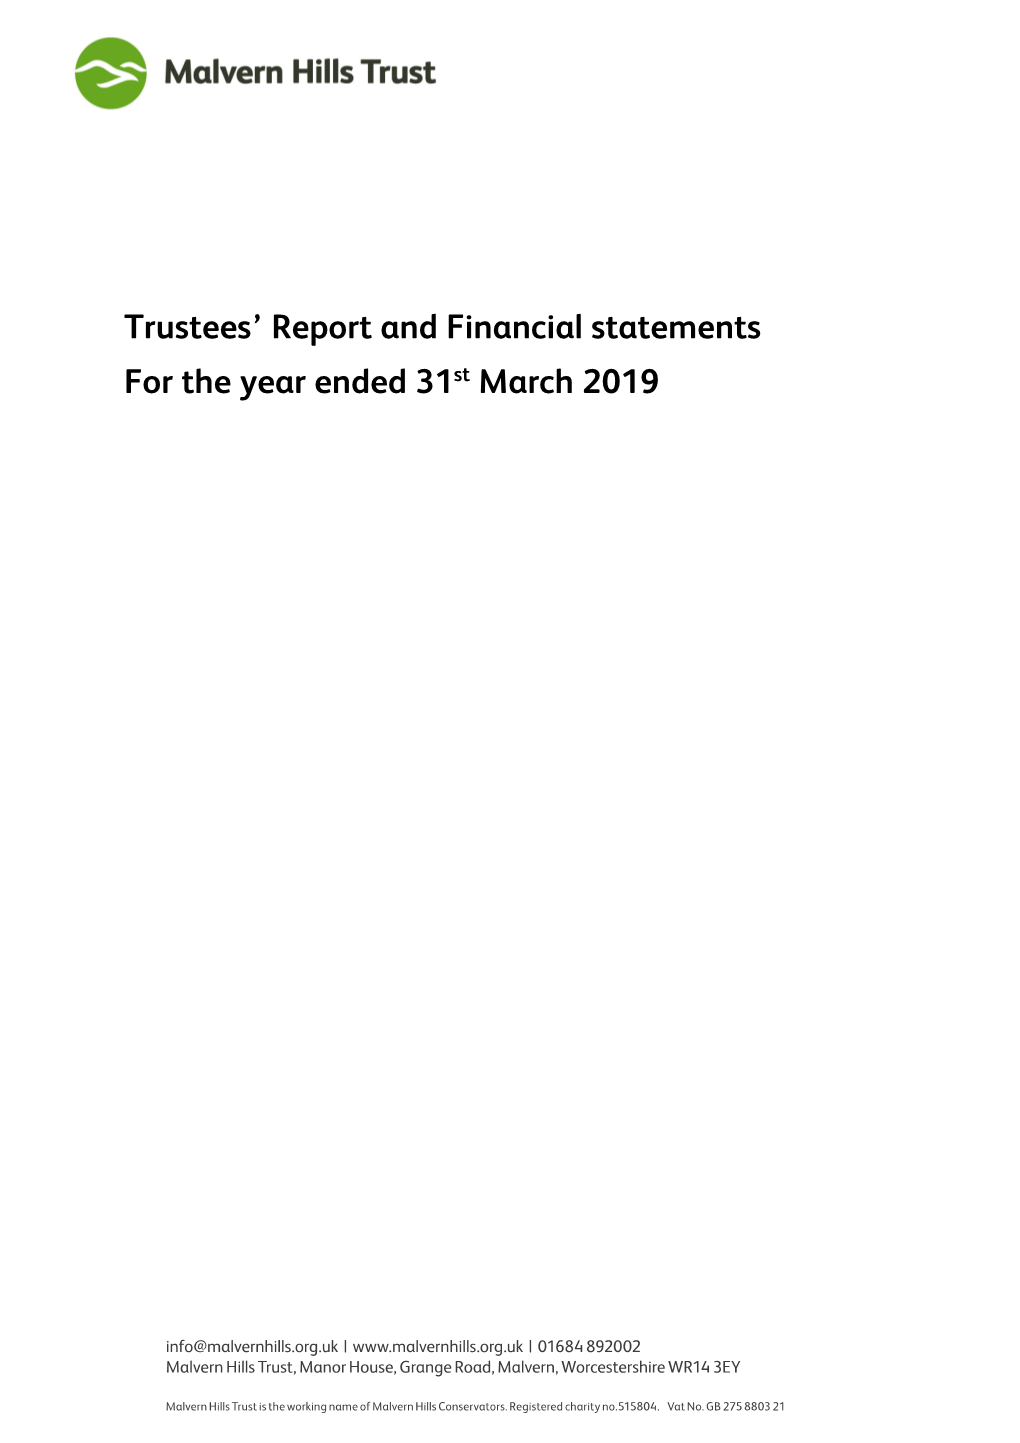 Trustees' Report and Financial Statements For